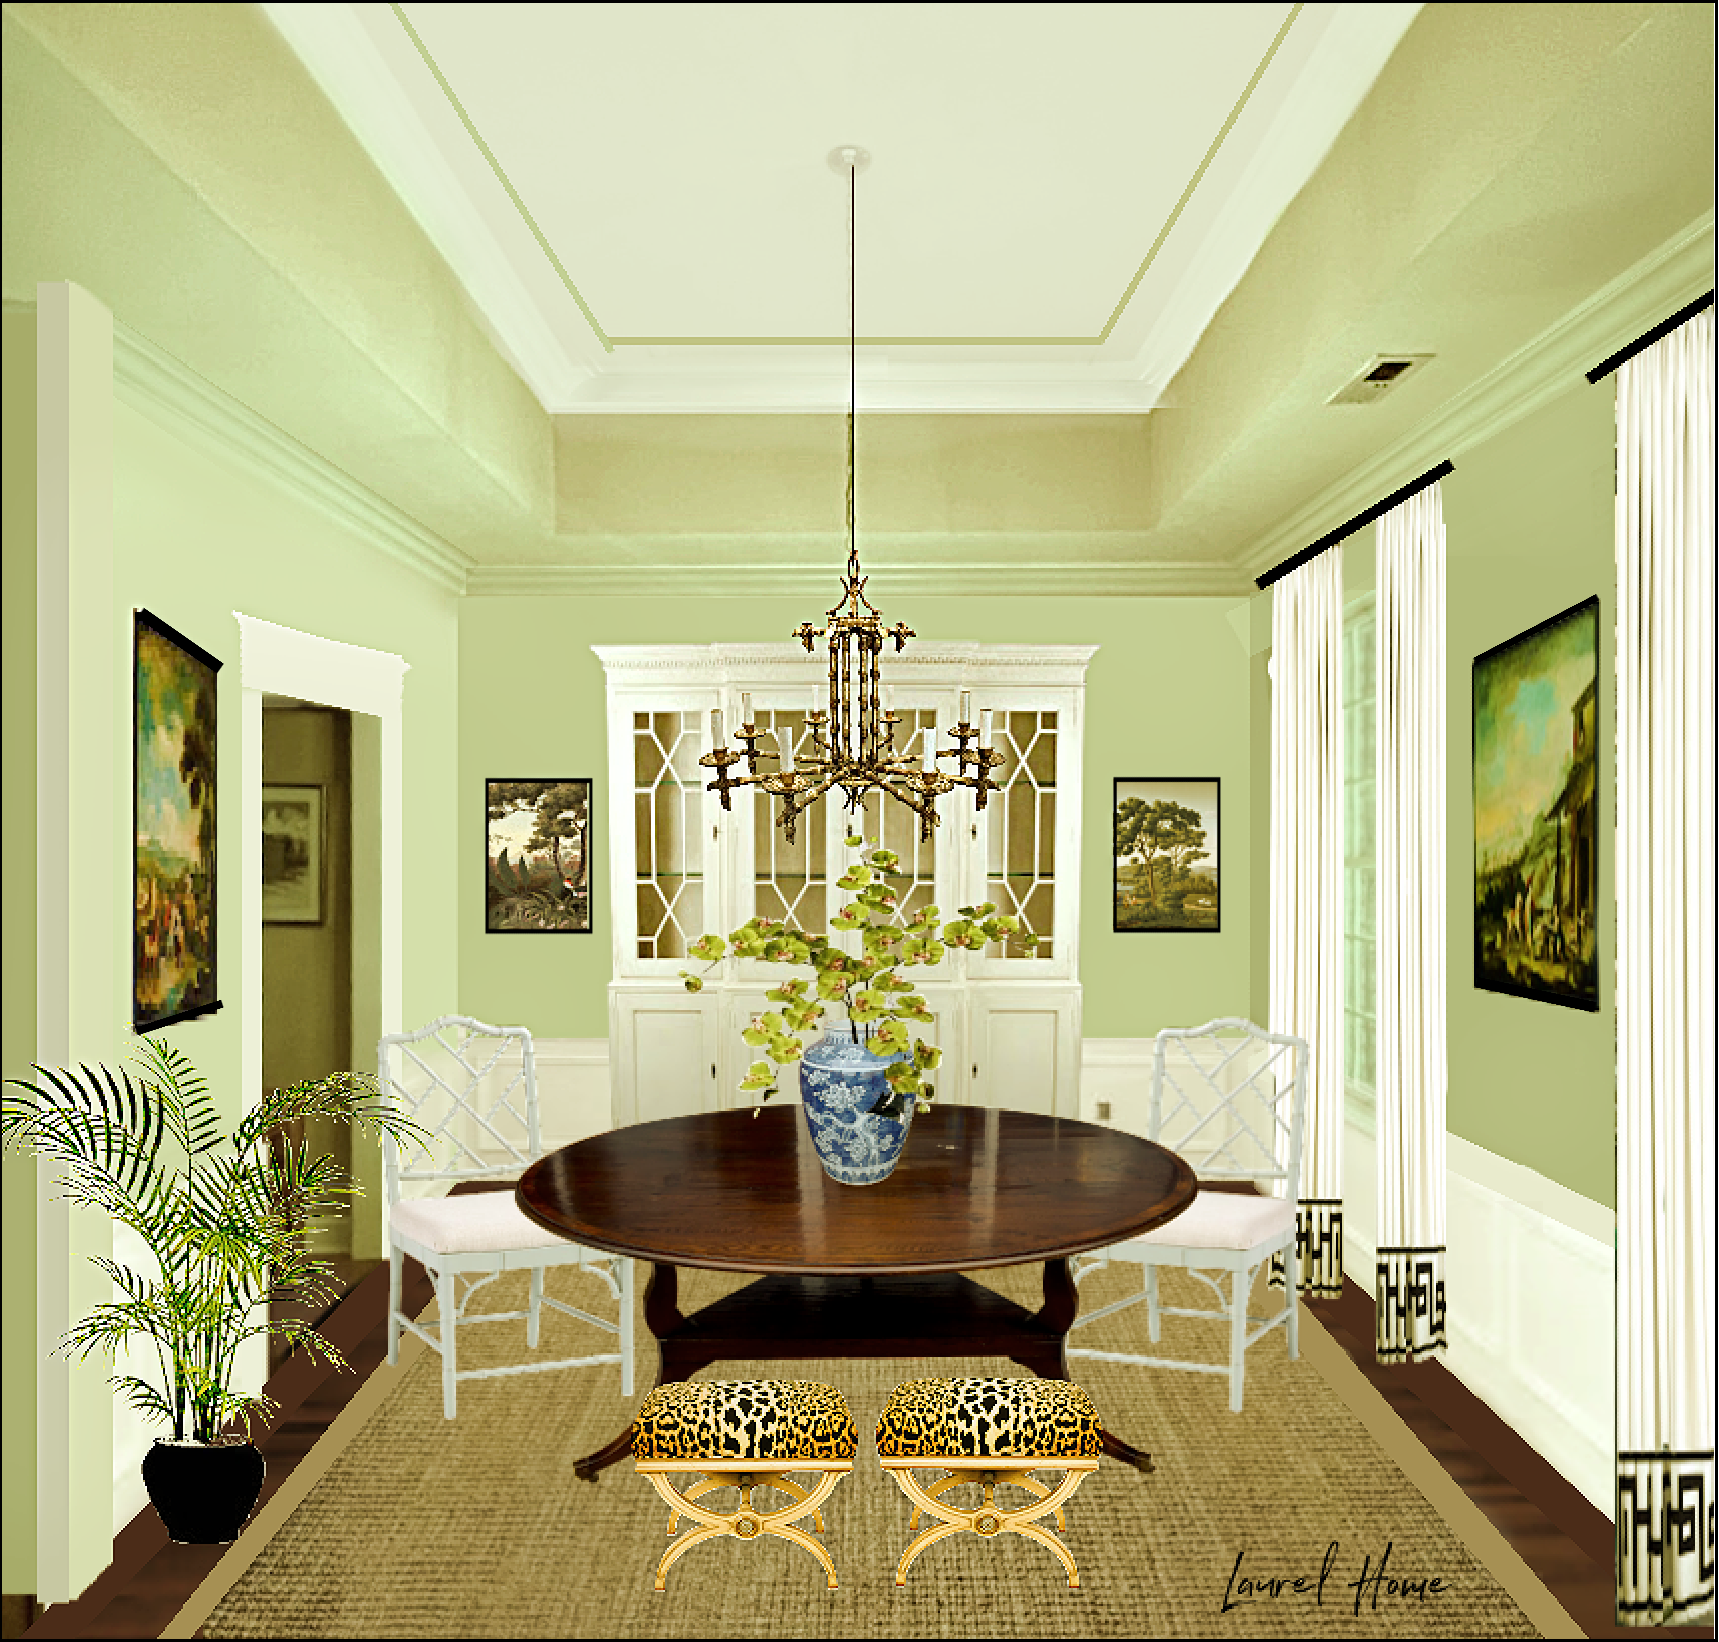 Susan's tray ceiling dining room yellow-green walls